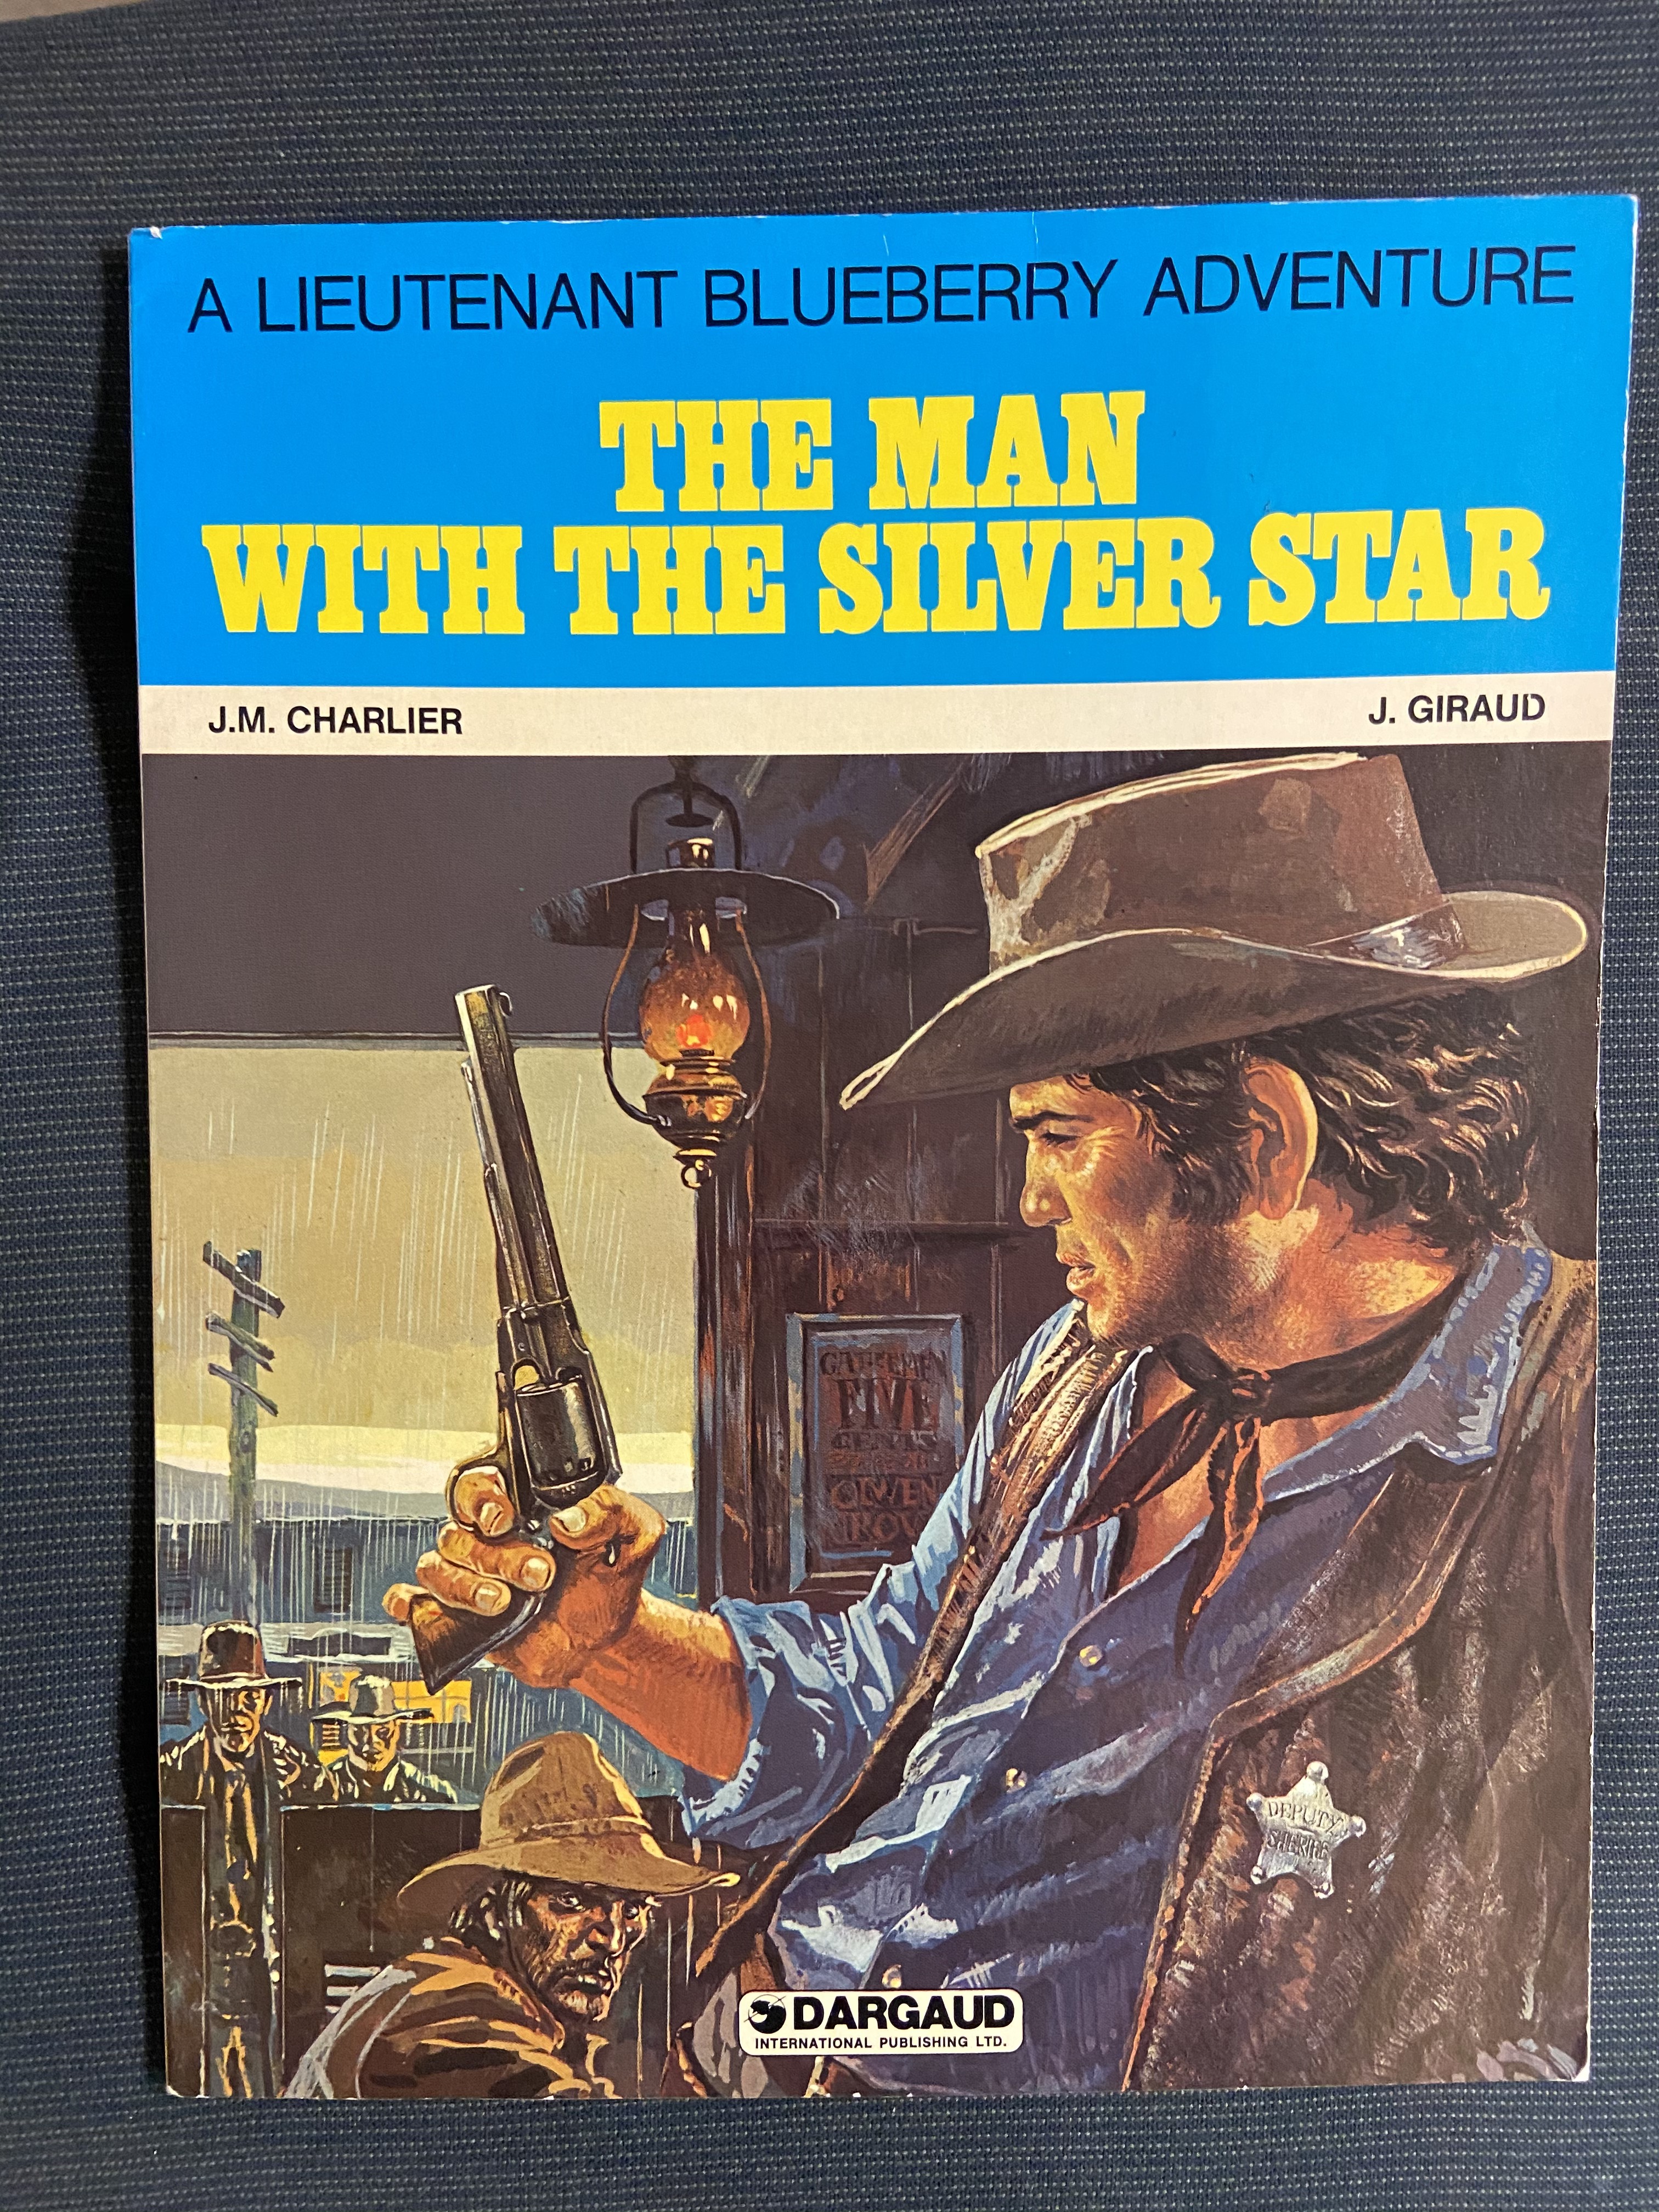 The Man With The Silver Star (A Lieutenant Blueberry adventure. Rare English translation) - Charlier, Jean-Michel and Giraud, Jean (Moebius)